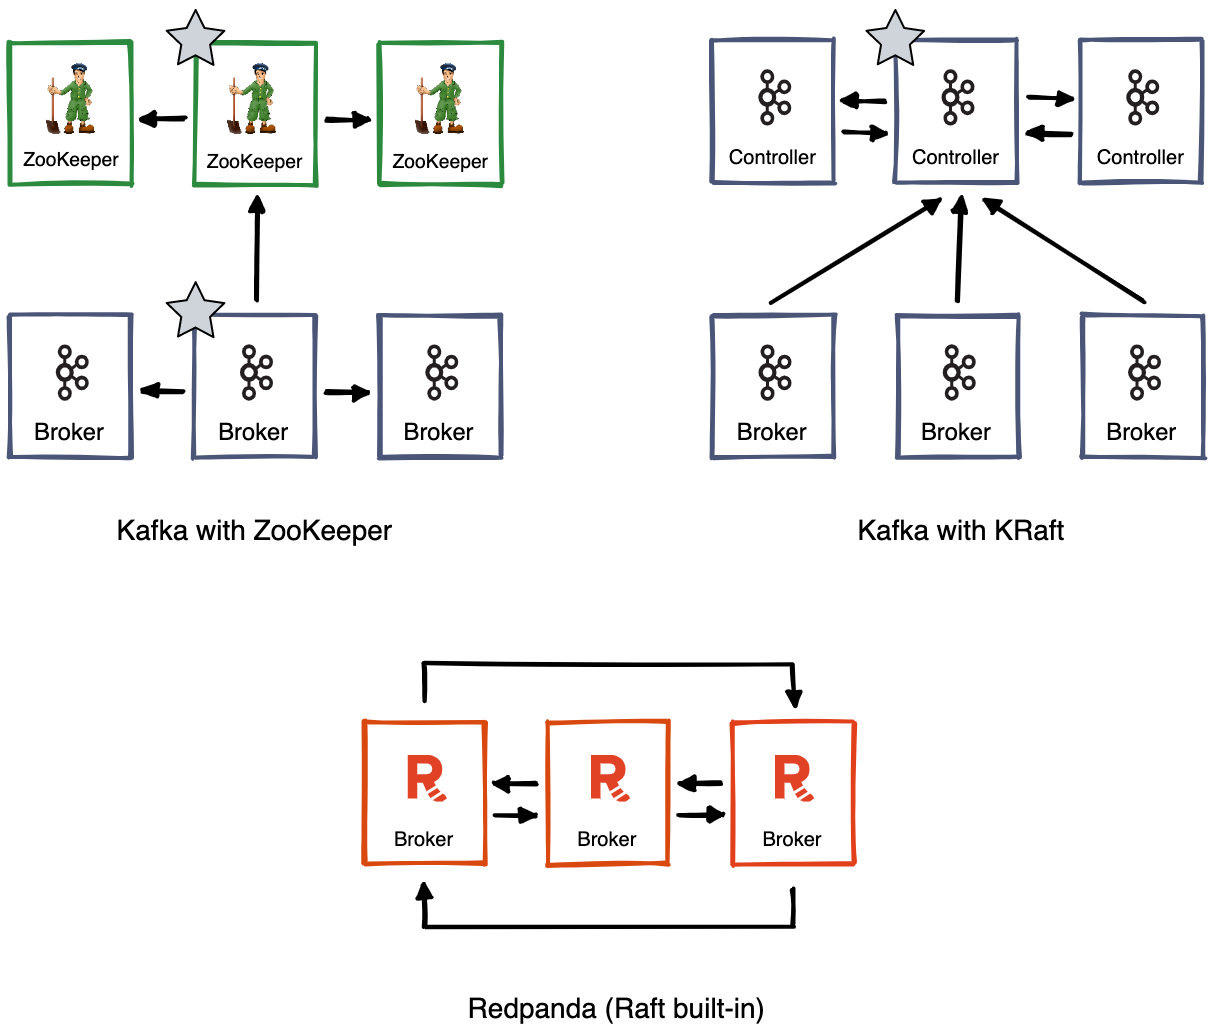 Diagram of nodes needed for Kafka with ZooKeeper, Kafka with KRaft, and Redpanda with Raft